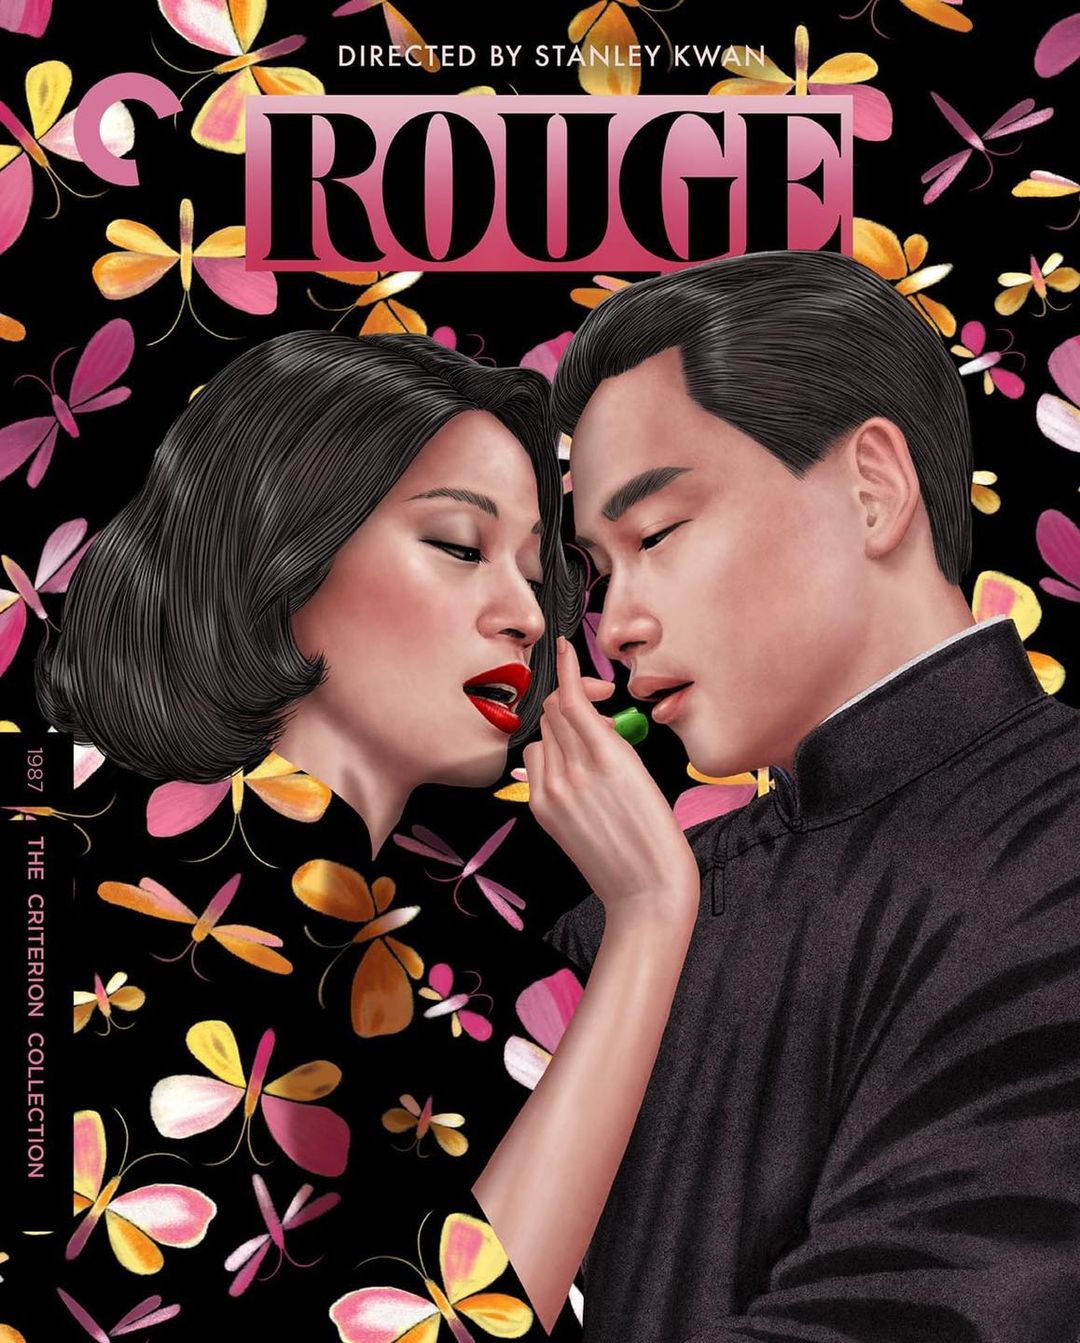 Criterion Collection announces Blu-ray and DVD for Stanley Kwan's 'Rouge'  starring Anita Mui and Leslie Cheung | cityonfire.com